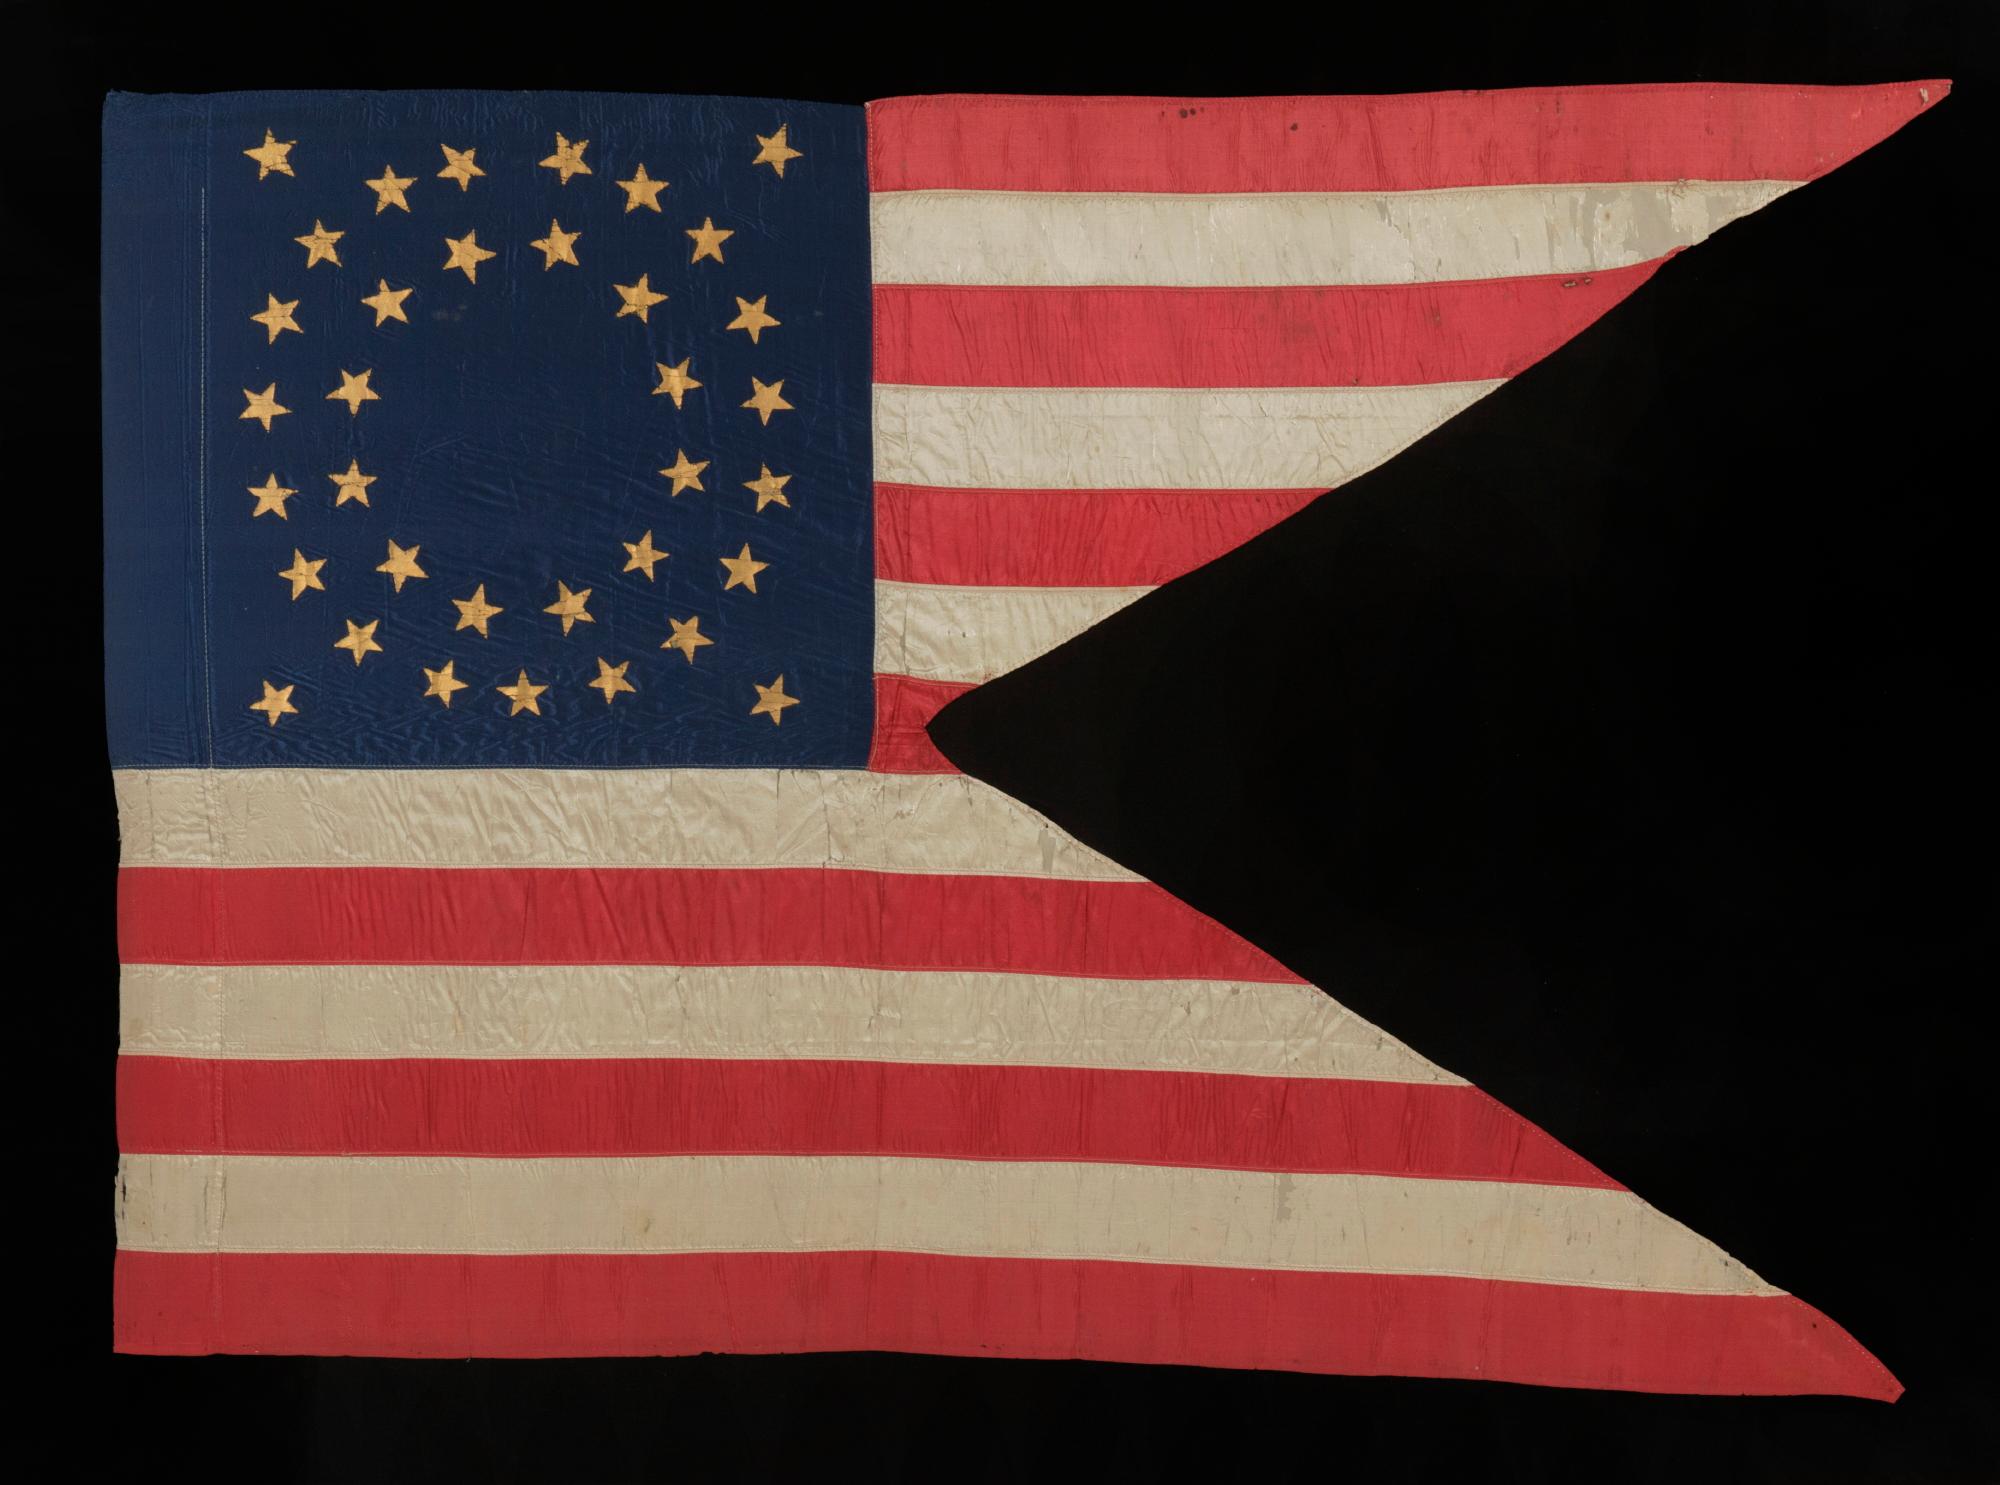 35 Star American Civil War Flag, a Silk Cavalry Guidon with gilt-painted stars in a double wreath arrangement, reflects West Virginia statehood, circa 1863-1865, in an exceptional state of preservation

Military issued, Union Army, Civil War